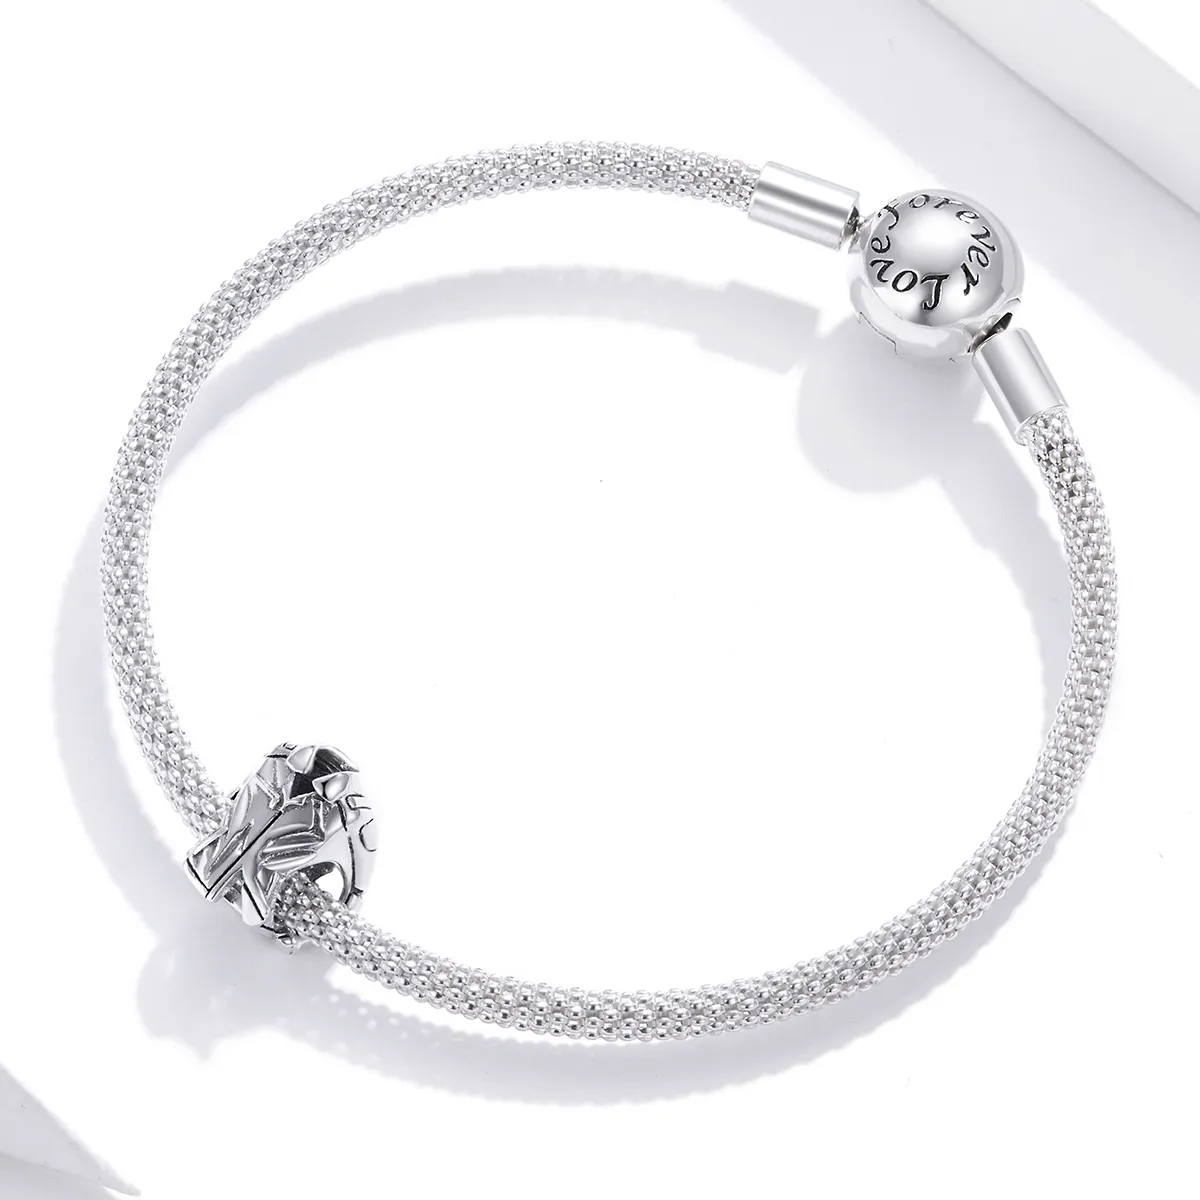 Pandora Style Motorcycle Suit Charm - BSC385